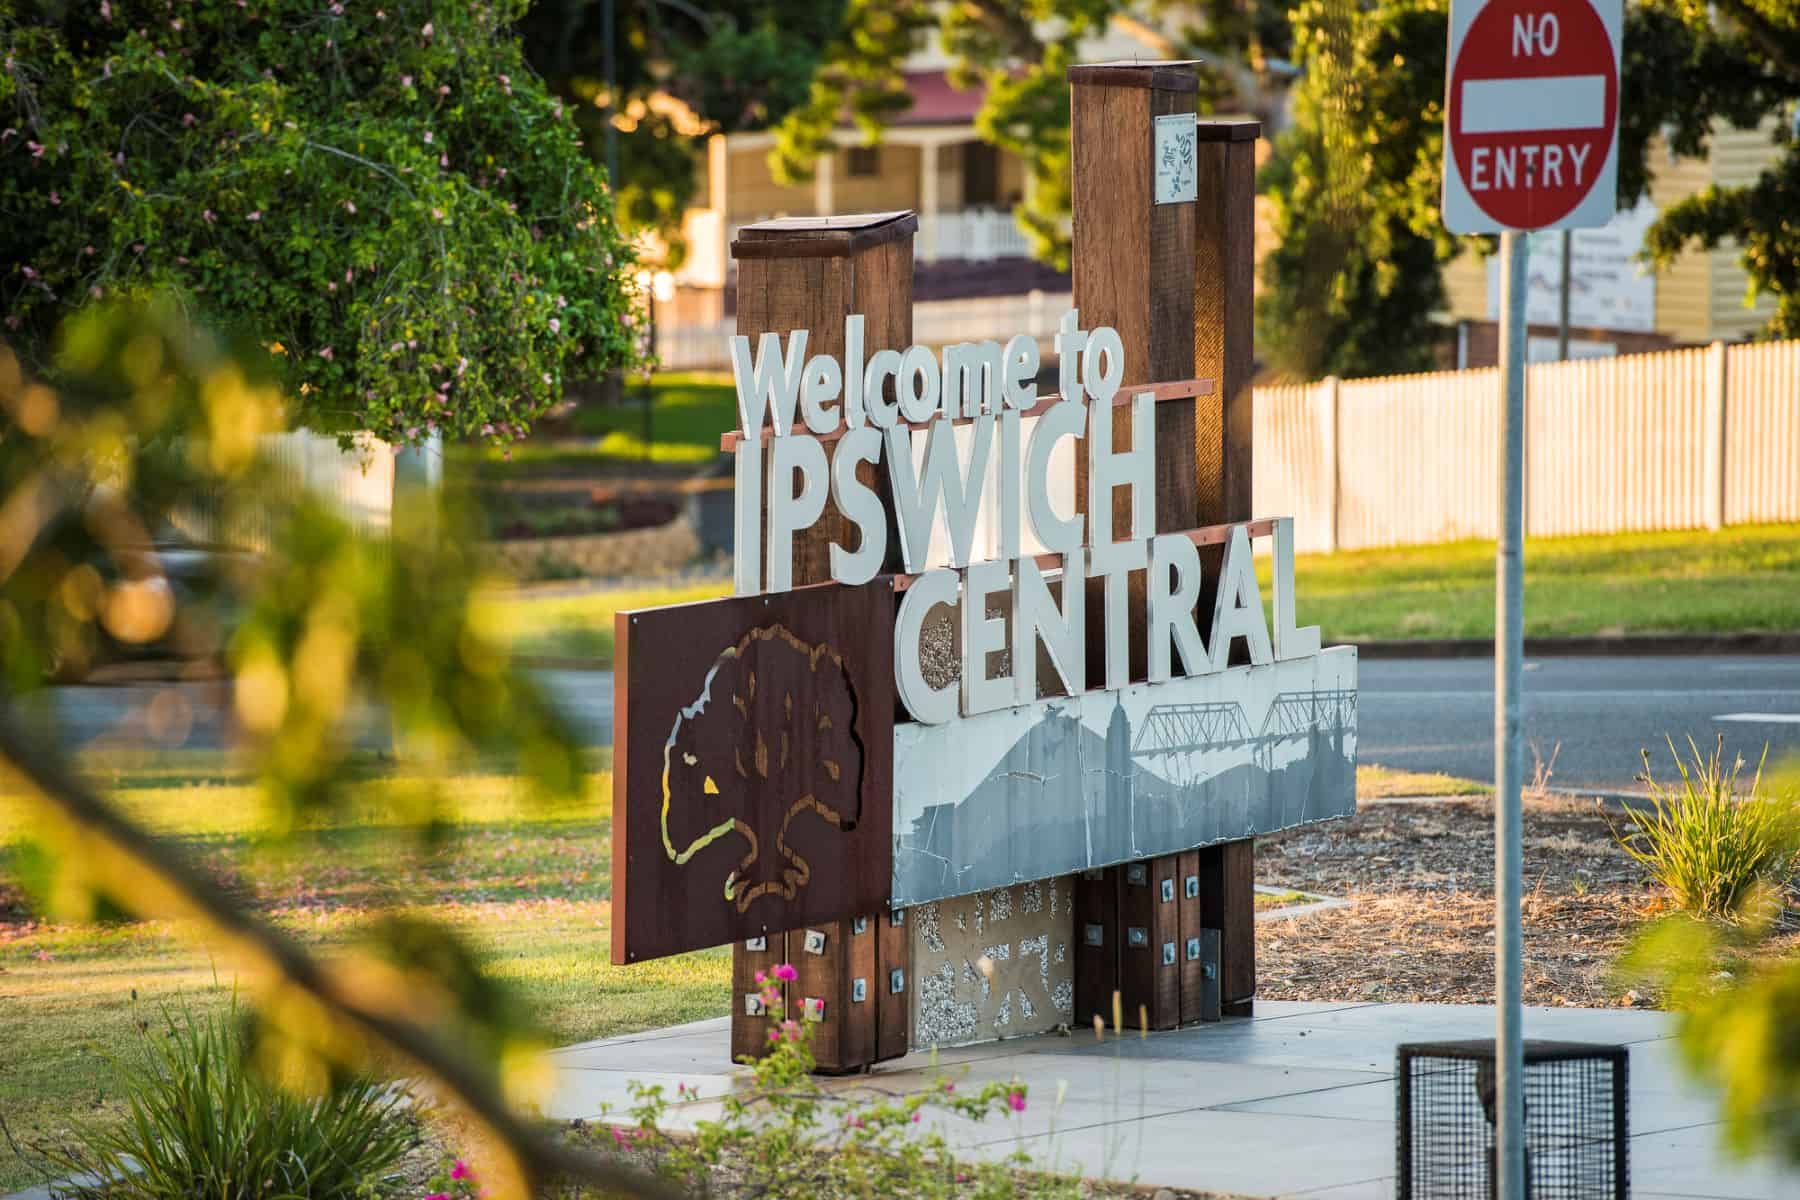 Ipswich Central welcome sign